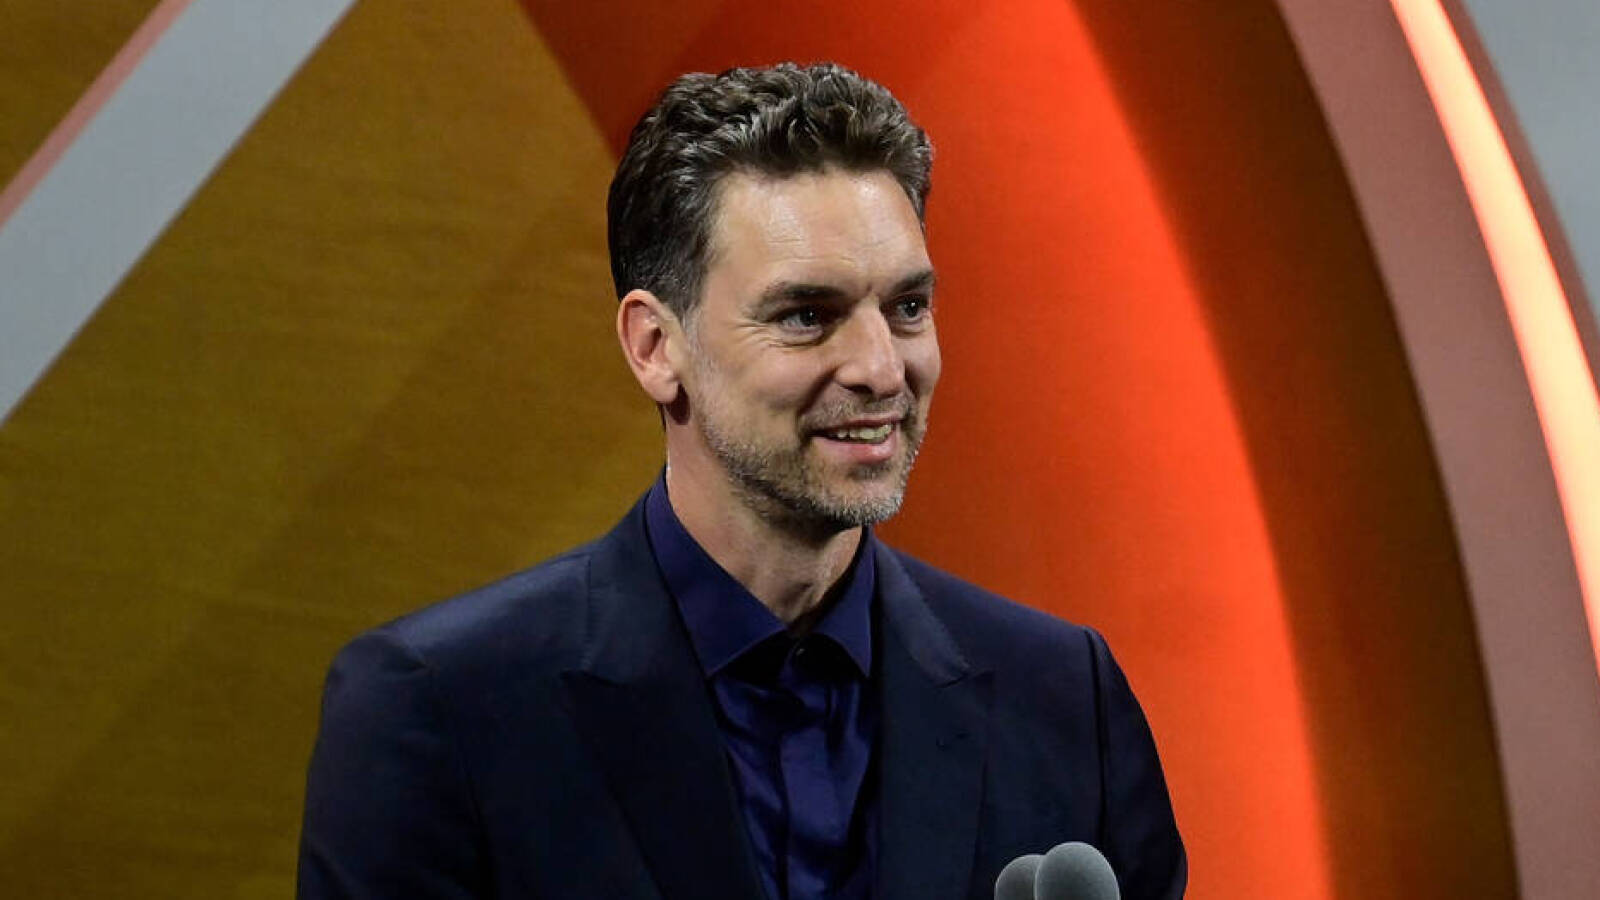 Pau Gasol pays tribute to Kobe Bryant in Hall of Fame speech